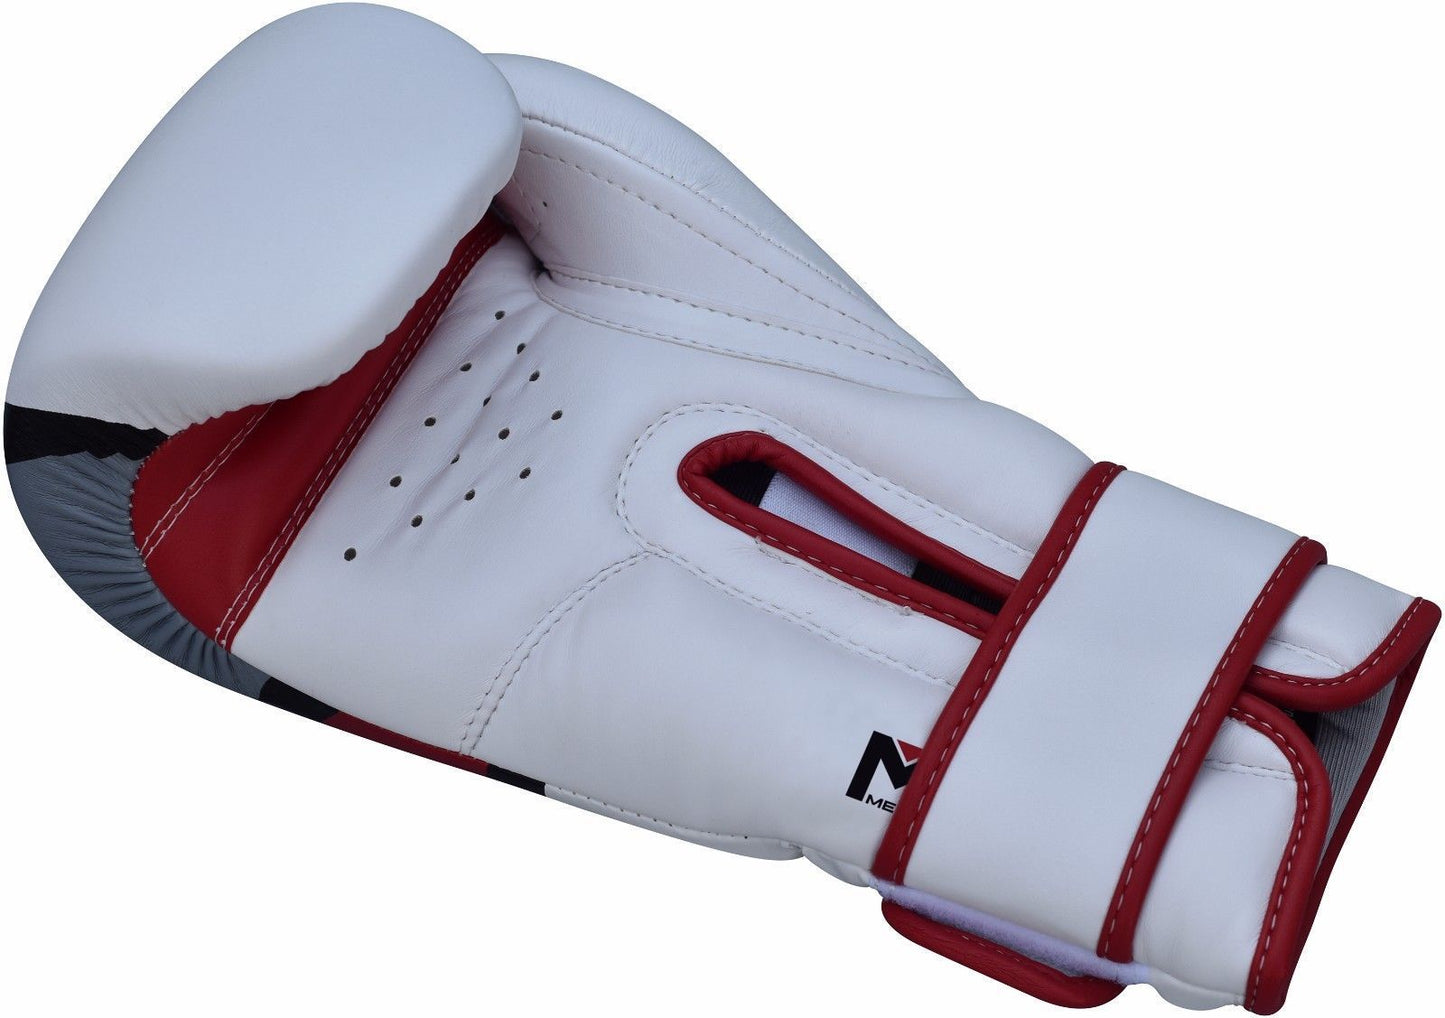 RDX F7 Ego Boxing Gloves- Red